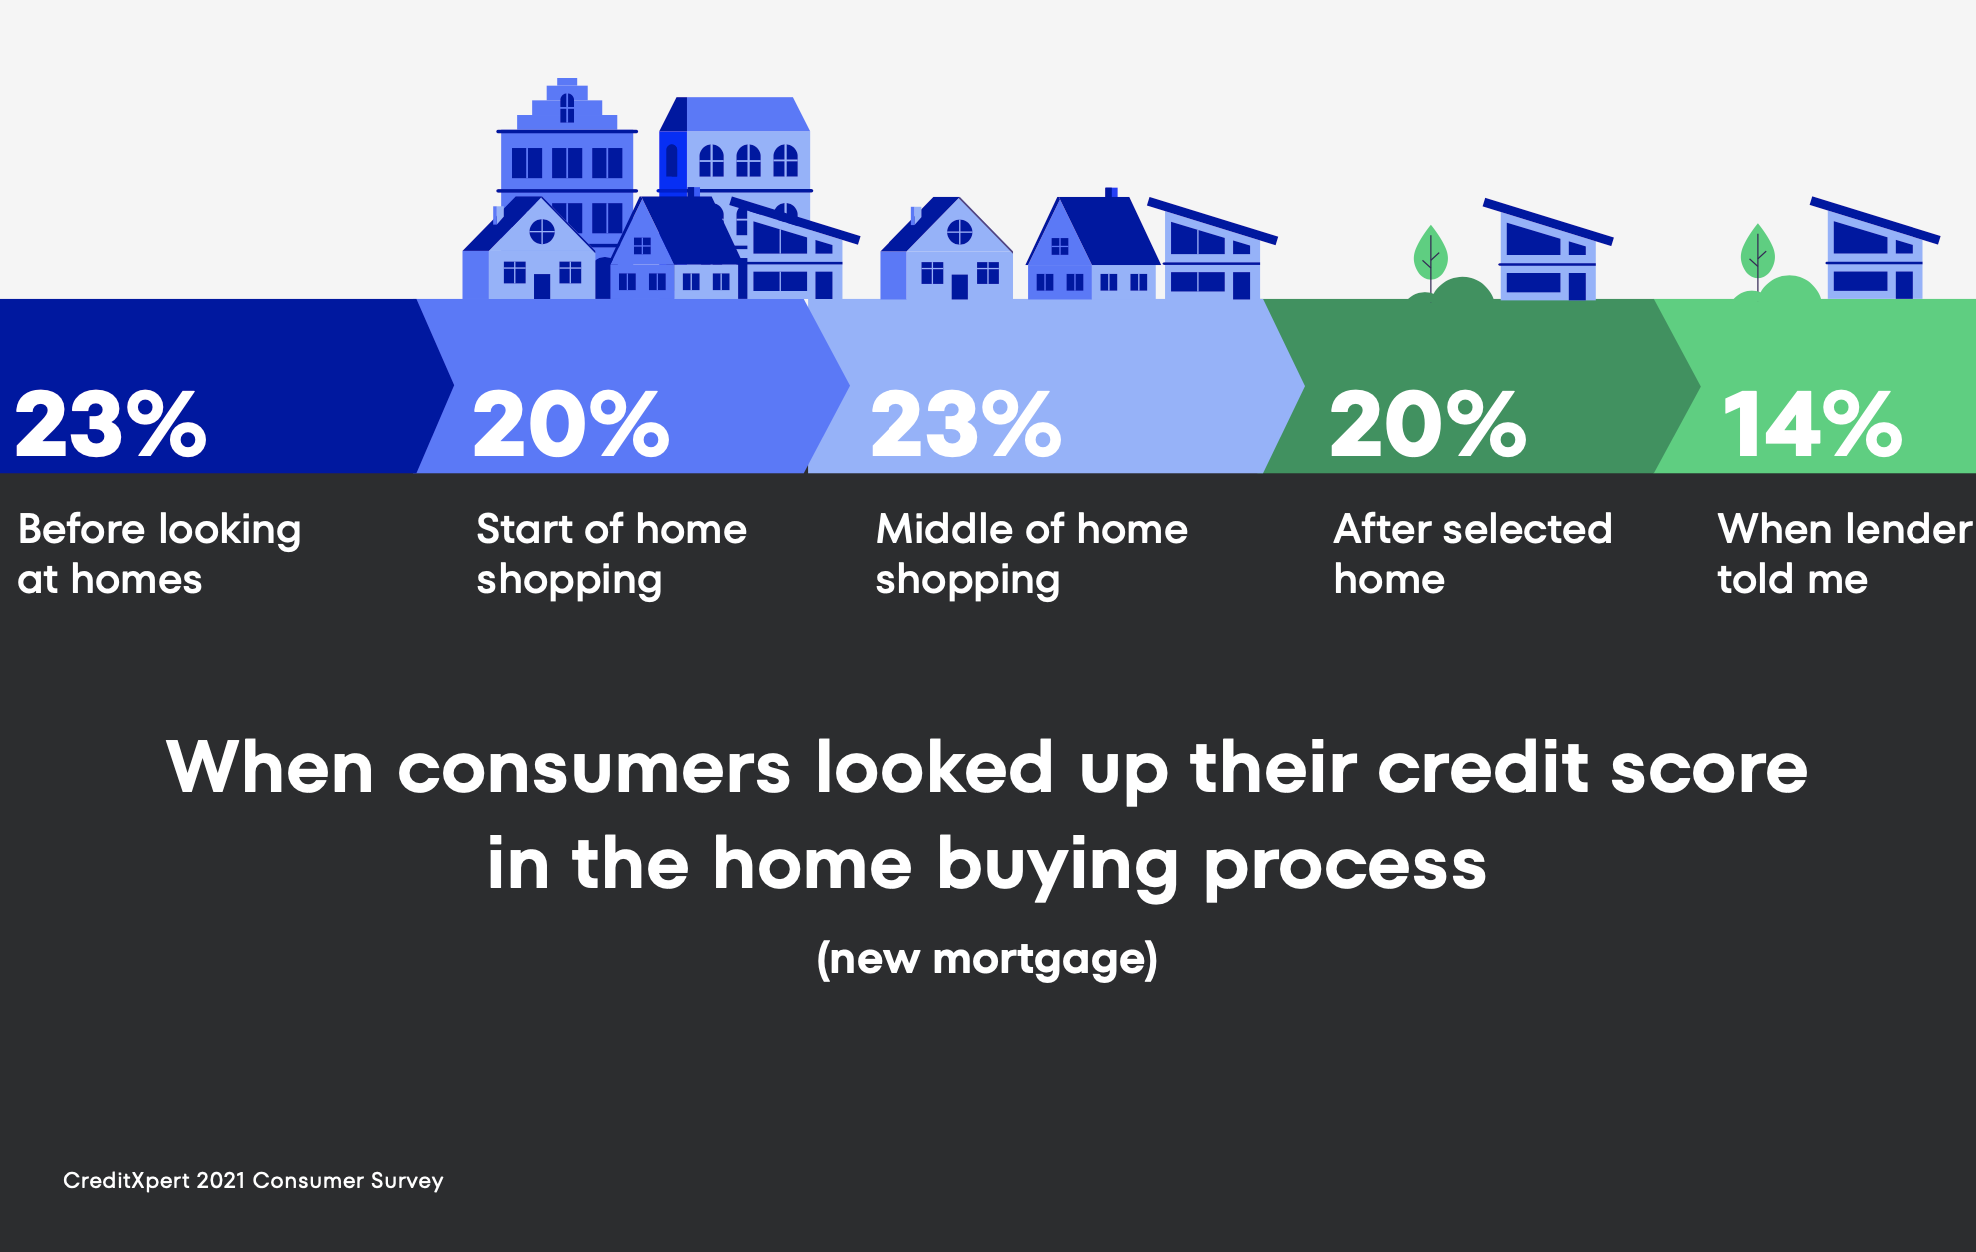 When in the home buying process consumers looked up their credit score